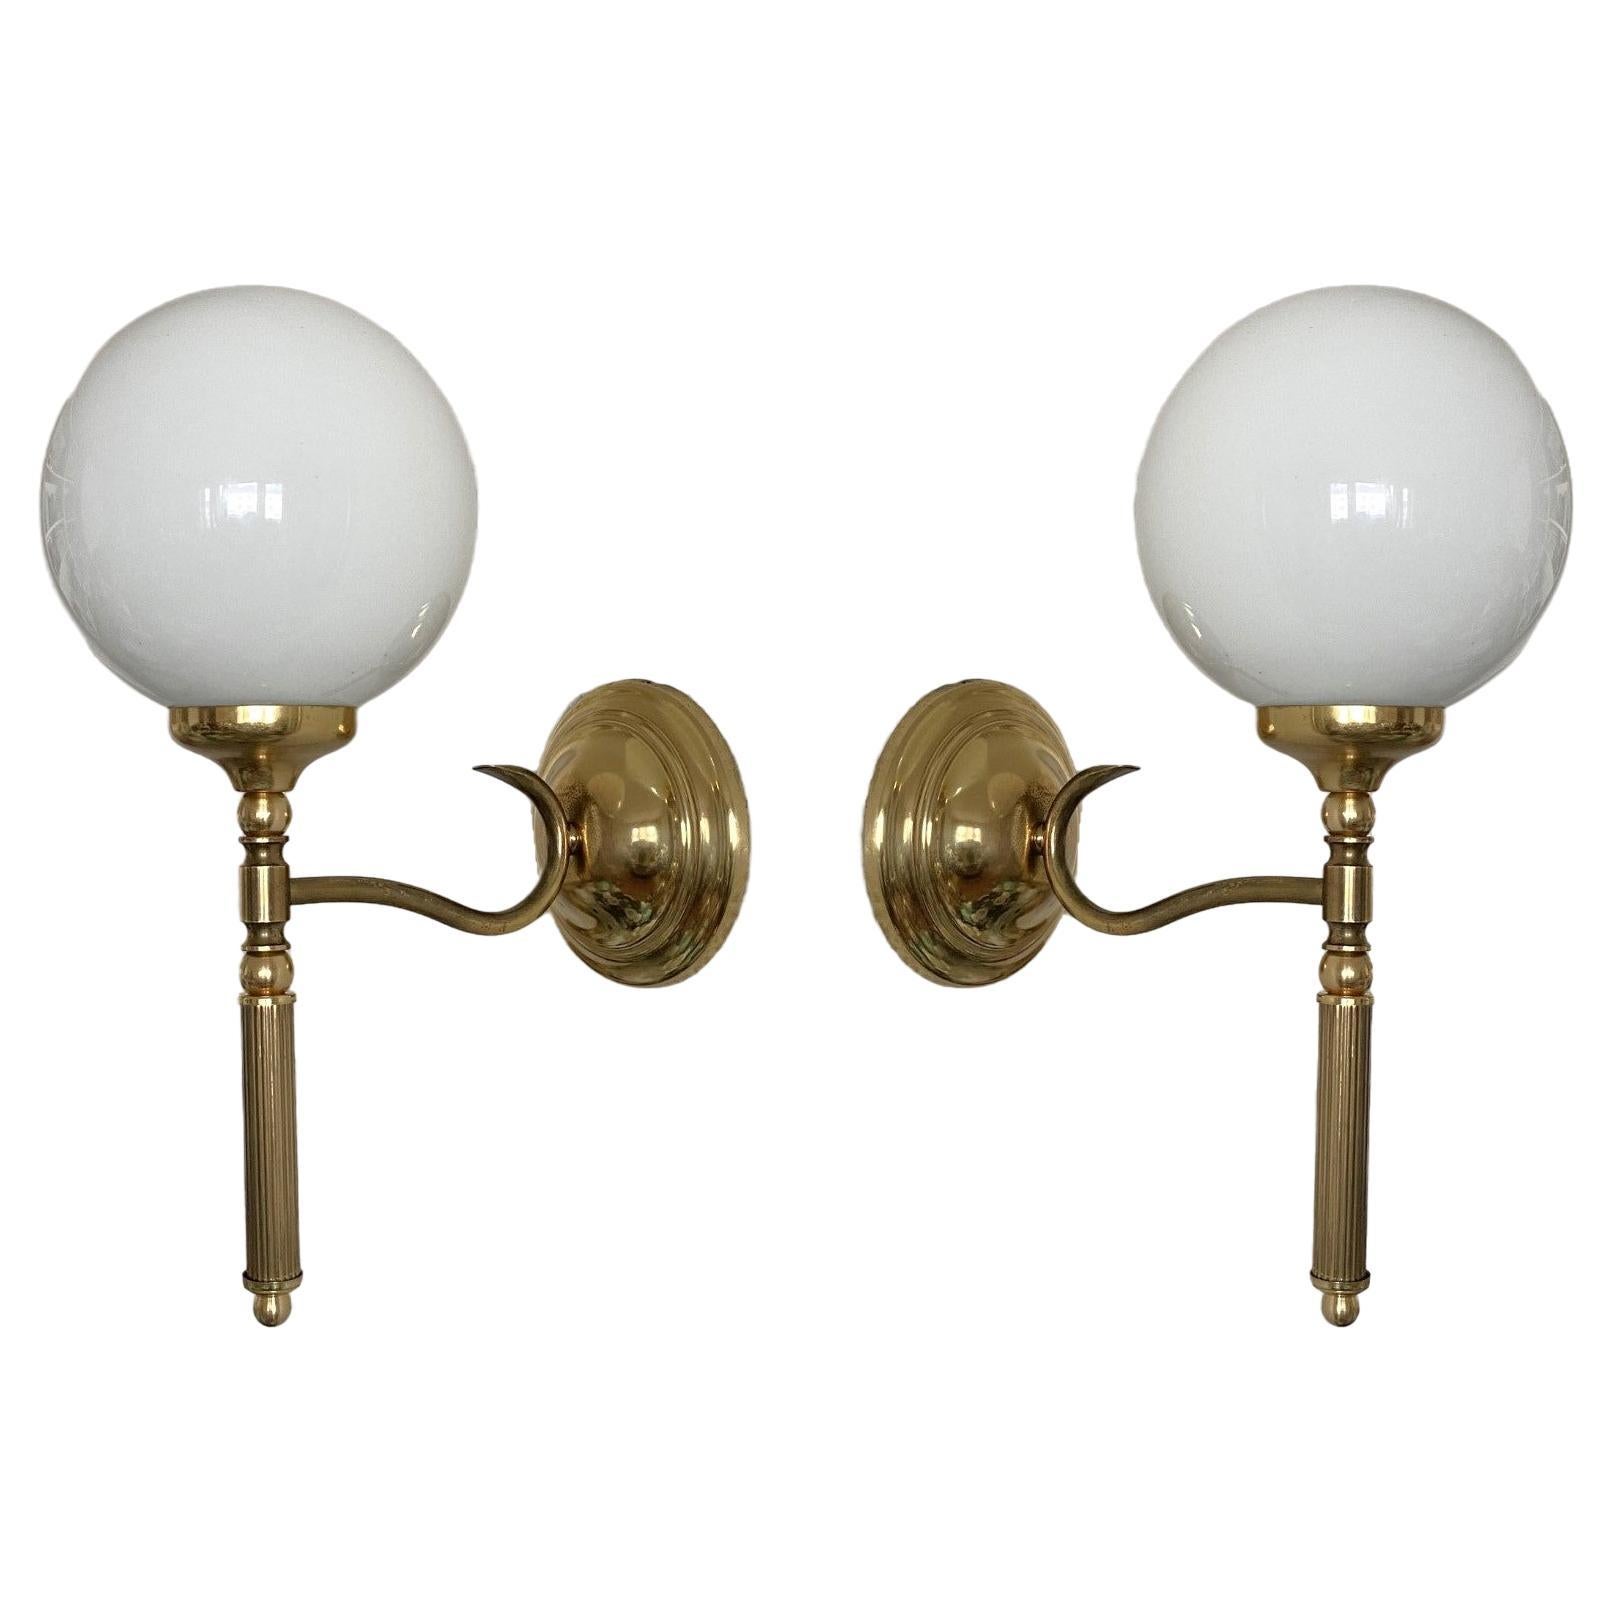 20th Century Pair of French Maison Jansen Style Brass Opaline Glass Wall Sconces, 1950s For Sale